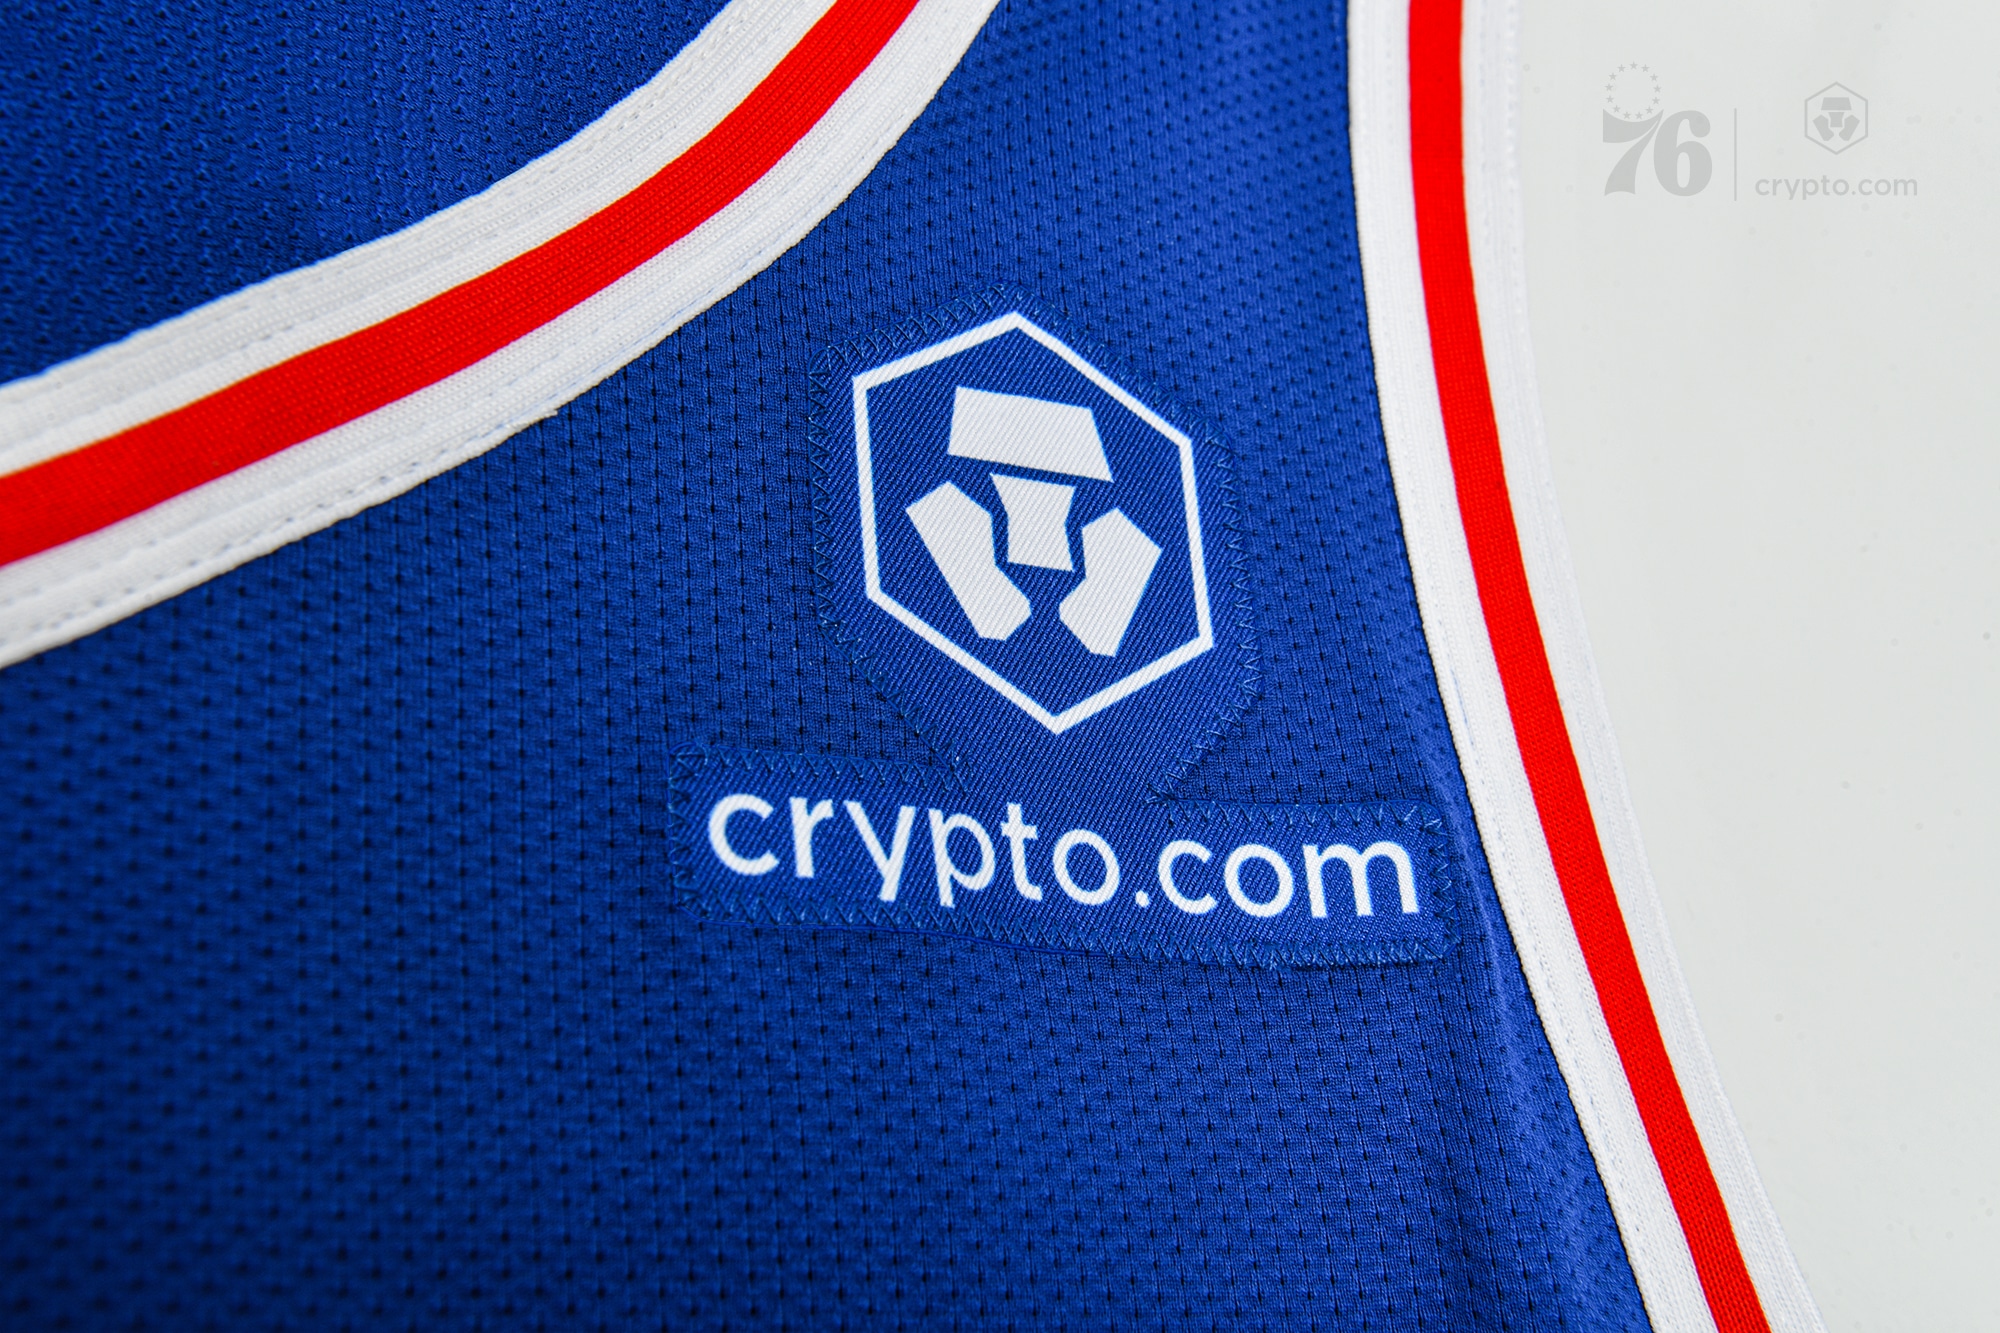 Sixers Going with Crypto.com as Jersey Patch Partner